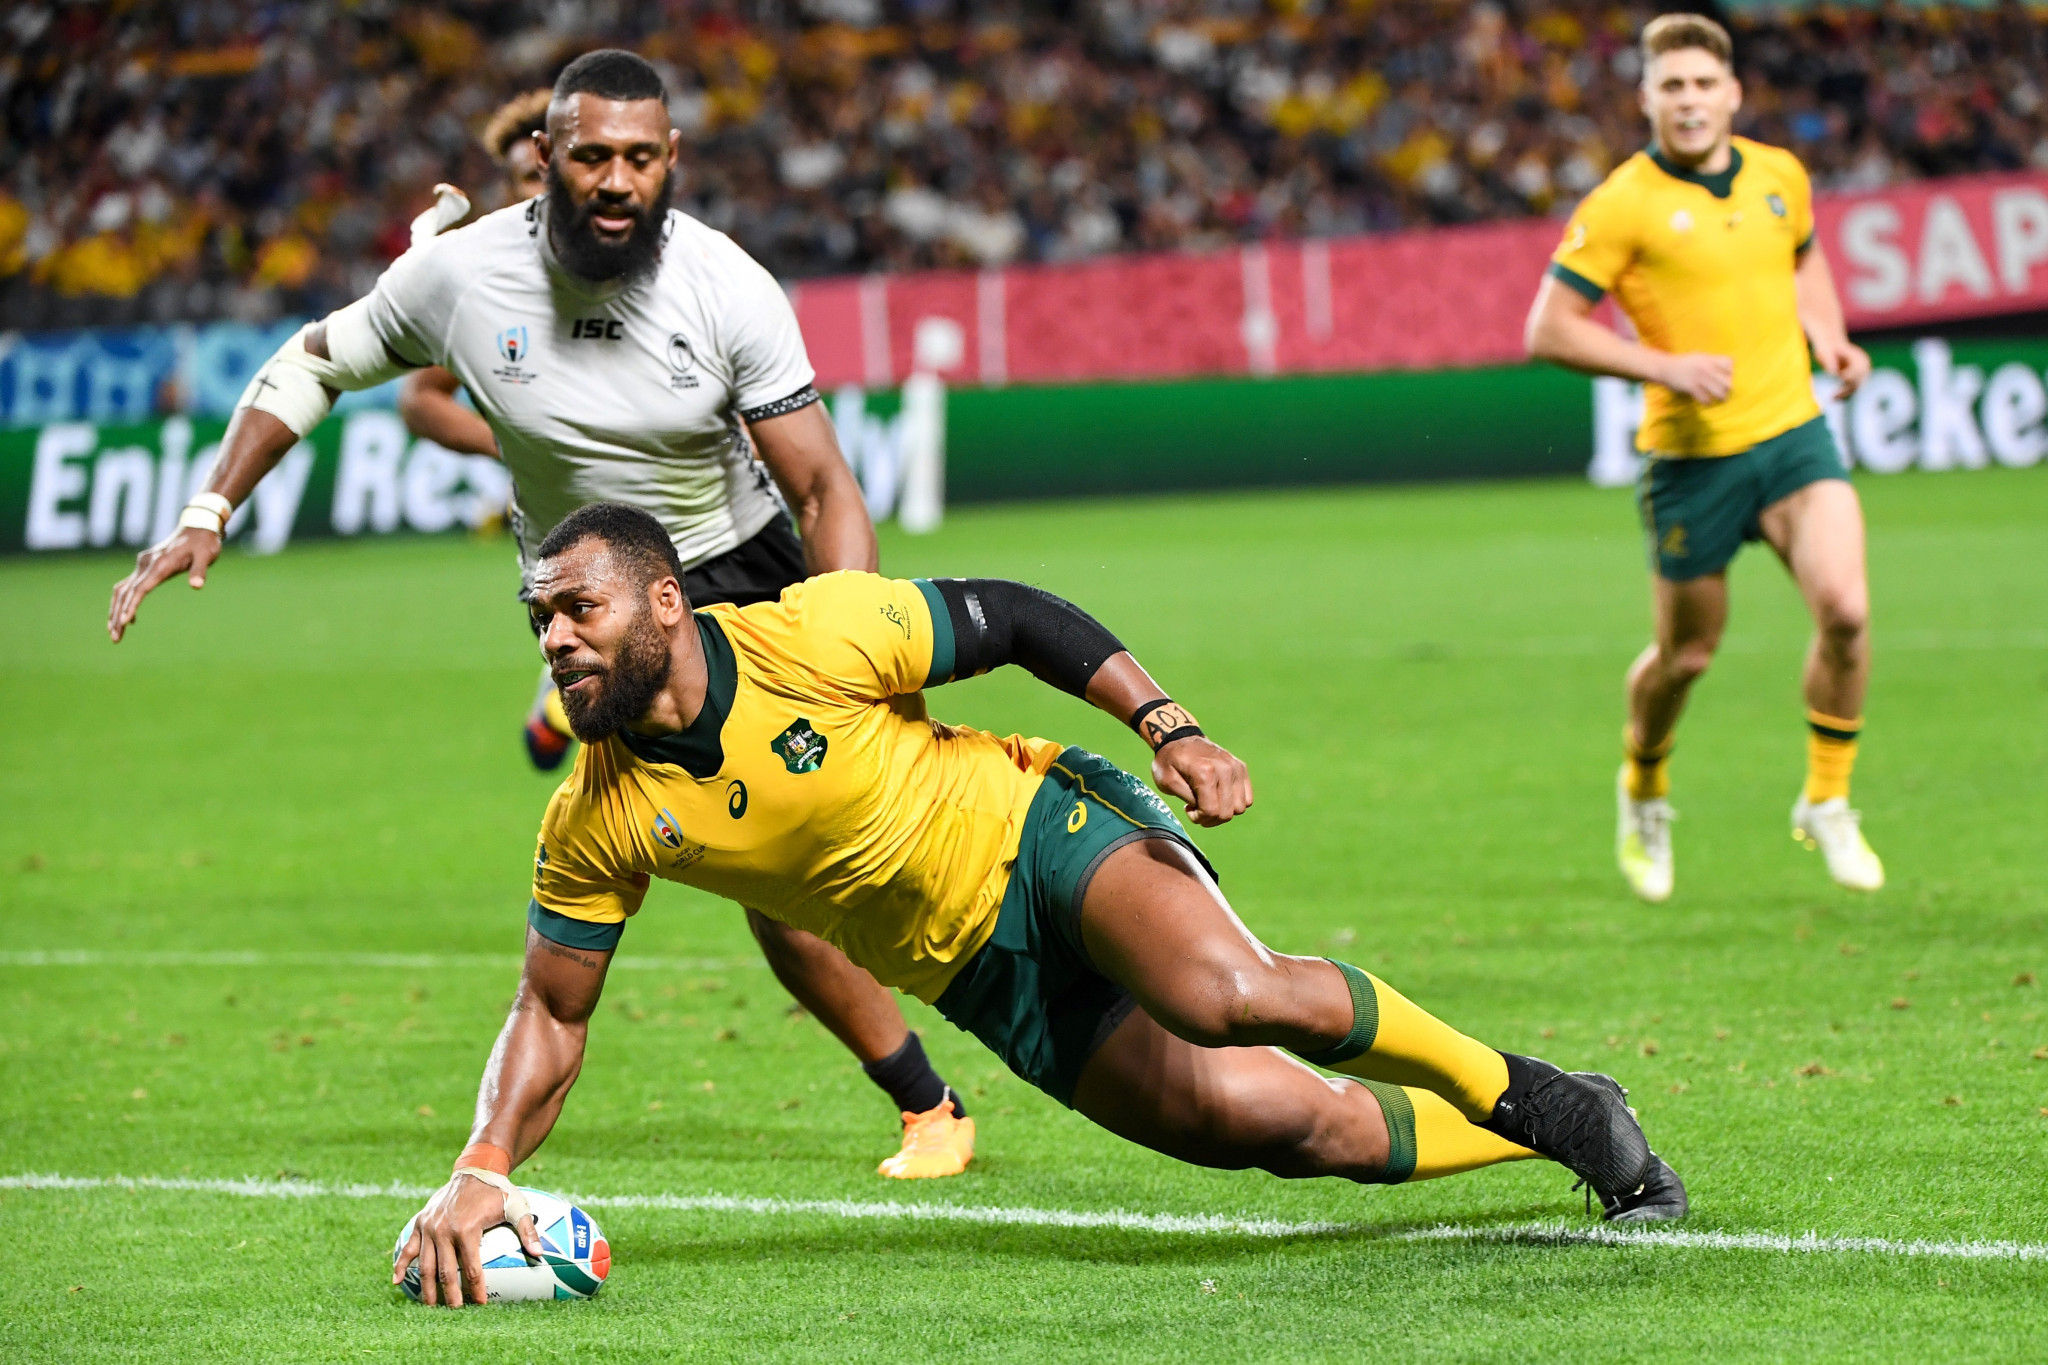 Samu Kerevi scored a crucial try for the Australians ©Getty Images